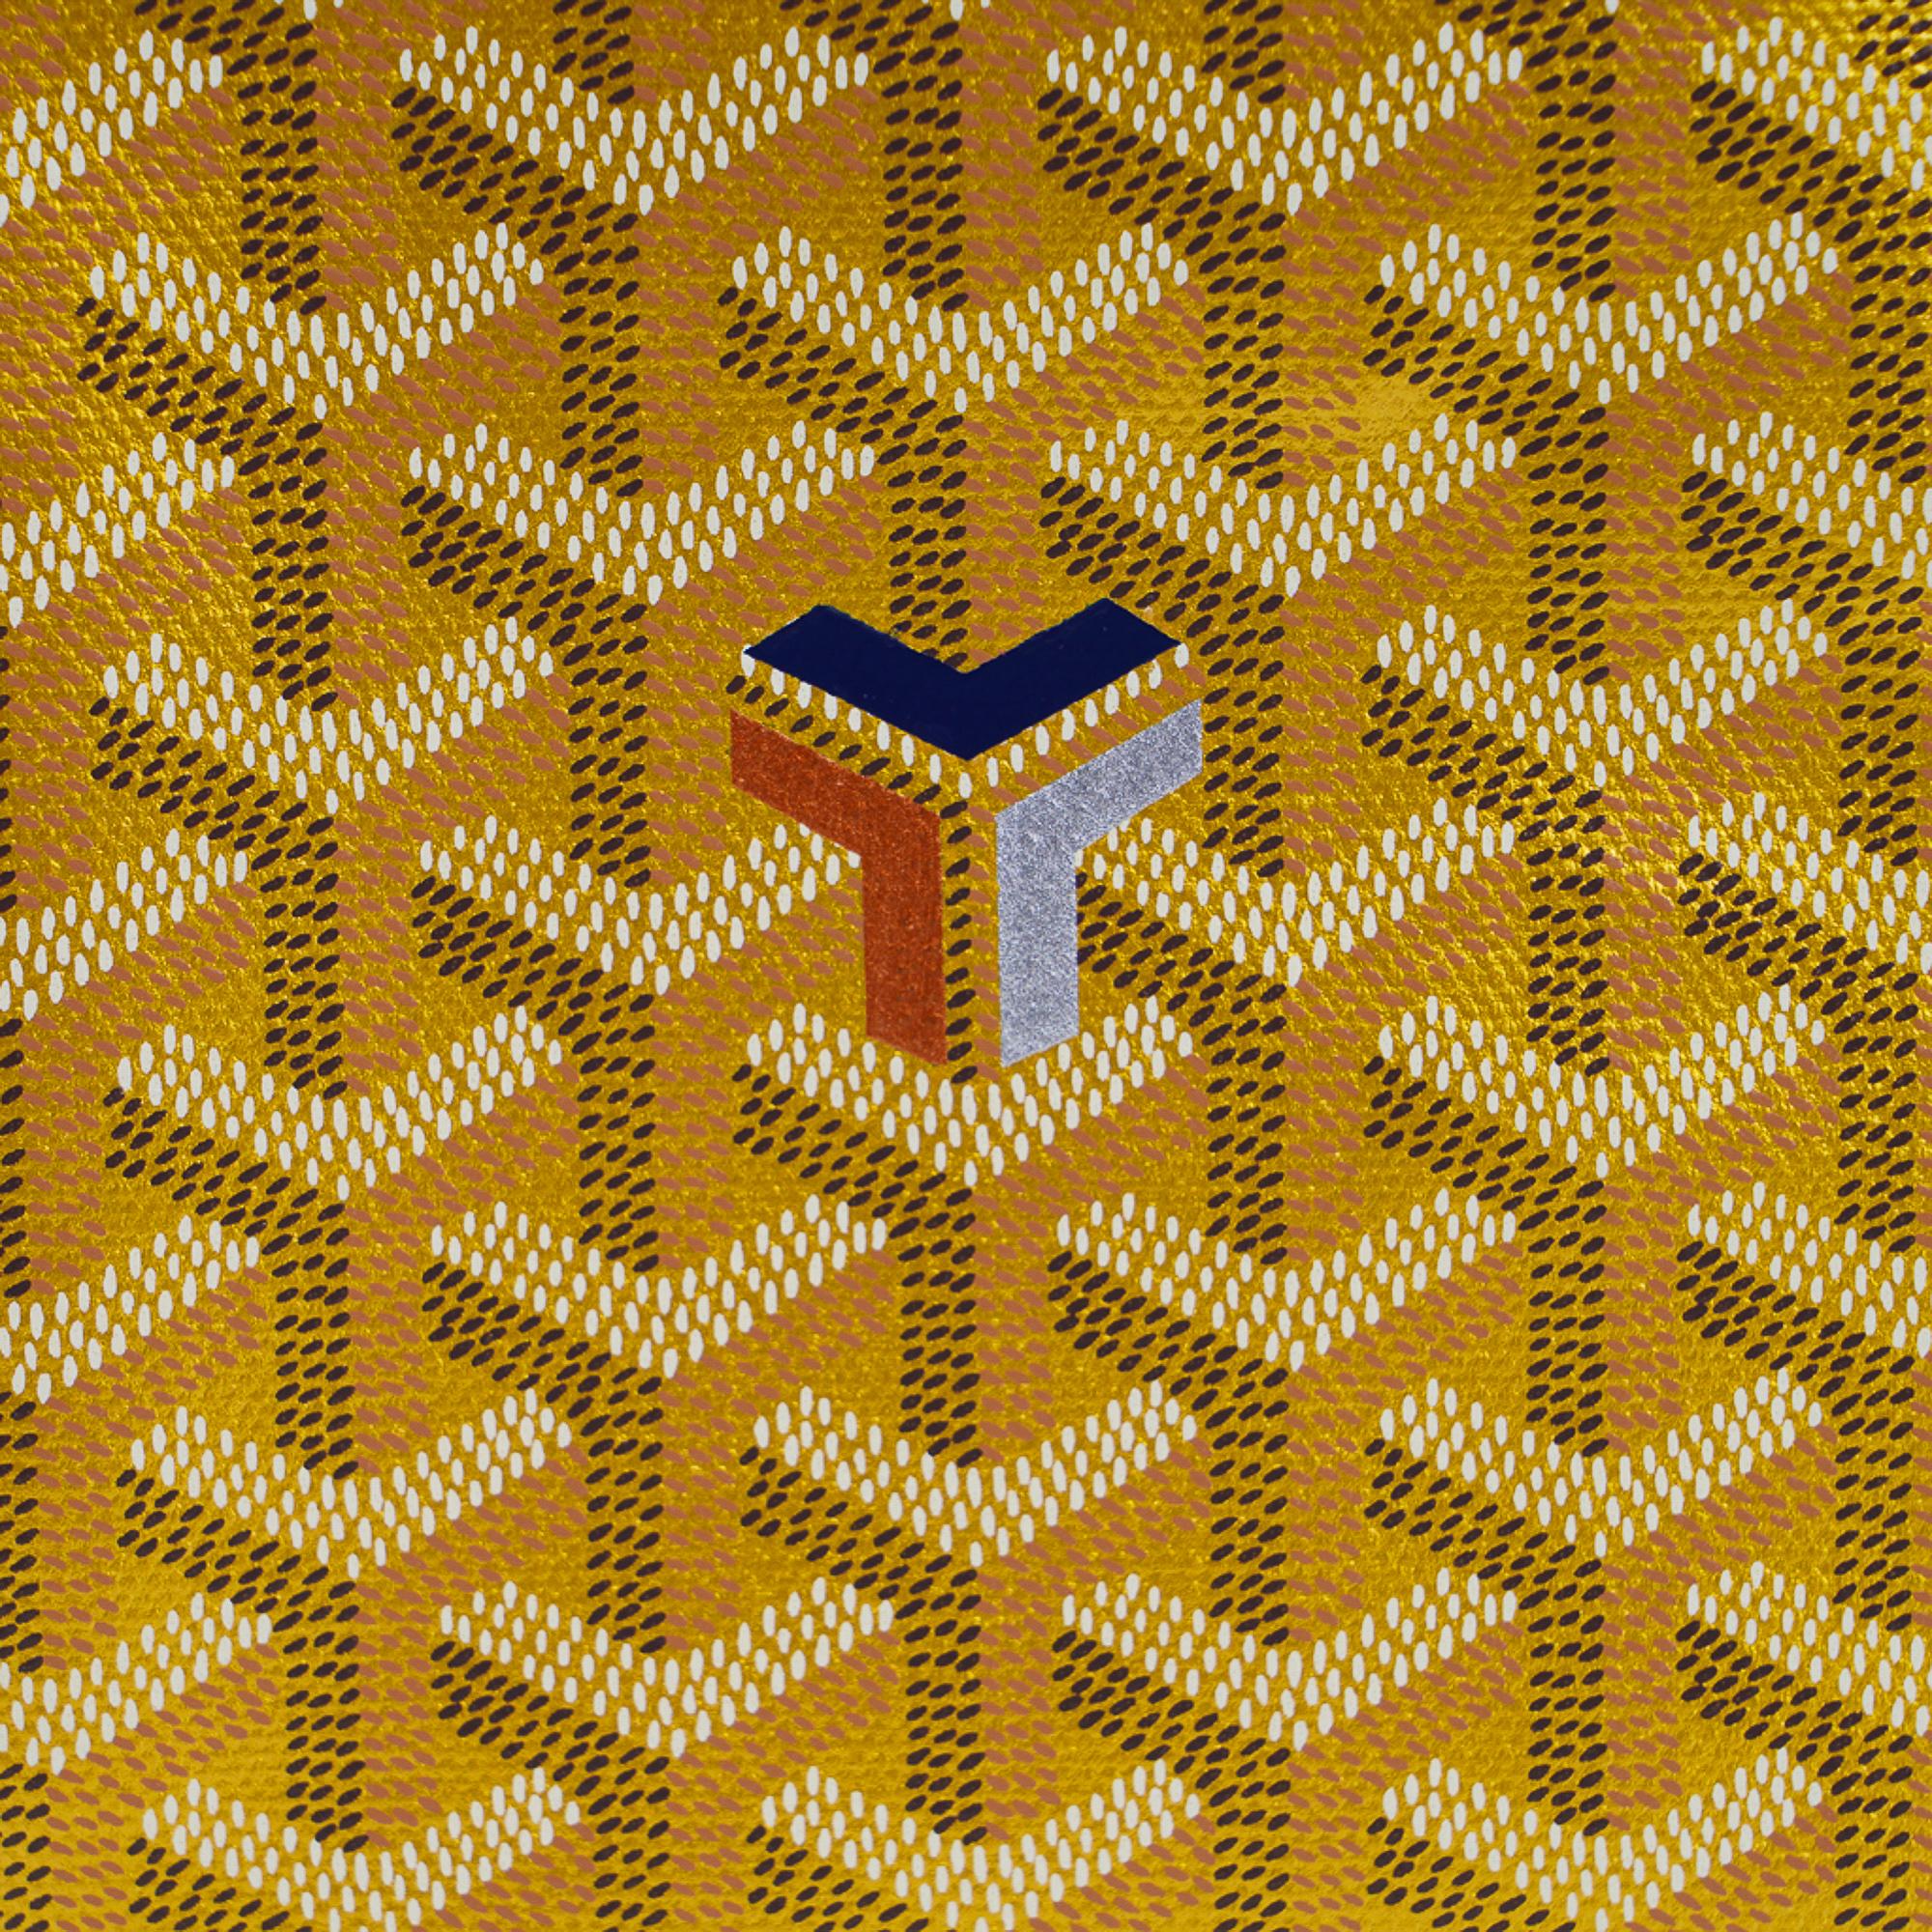 Mightychic offers a guaranteed authentic Goyard Saint Louis PM Limited Edition 2021 Gold Metallic tote.
Highly sought after and rare, this fabulous, fun tote is the perfect go to!
Classic signature chevron print and calfskin leather.
Light weight